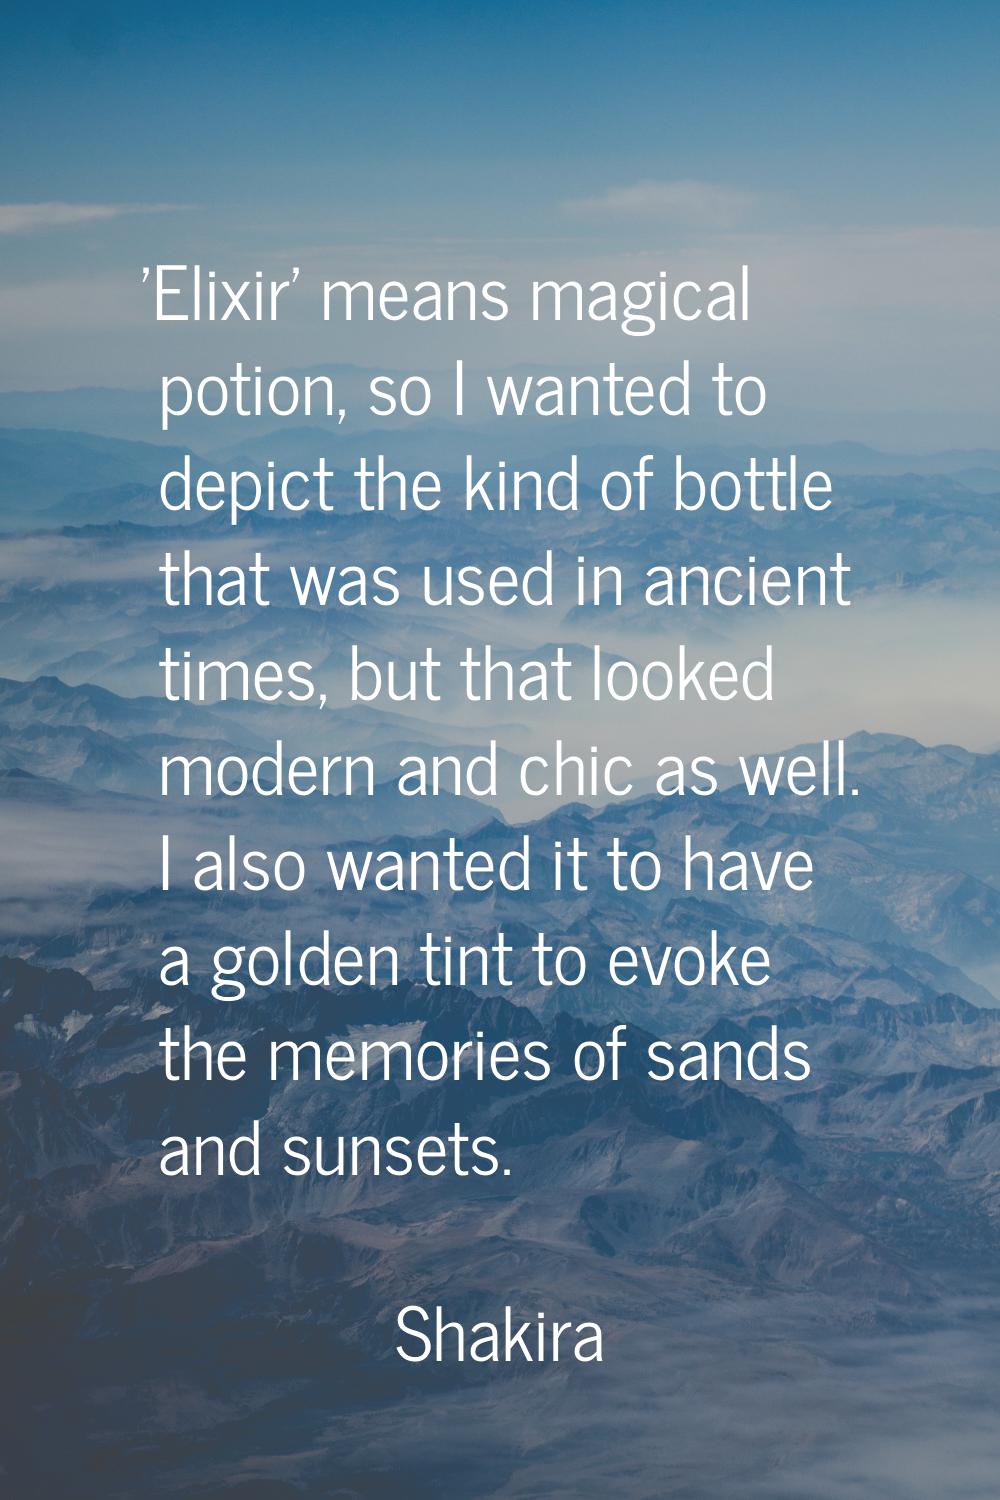 'Elixir' means magical potion, so I wanted to depict the kind of bottle that was used in ancient ti